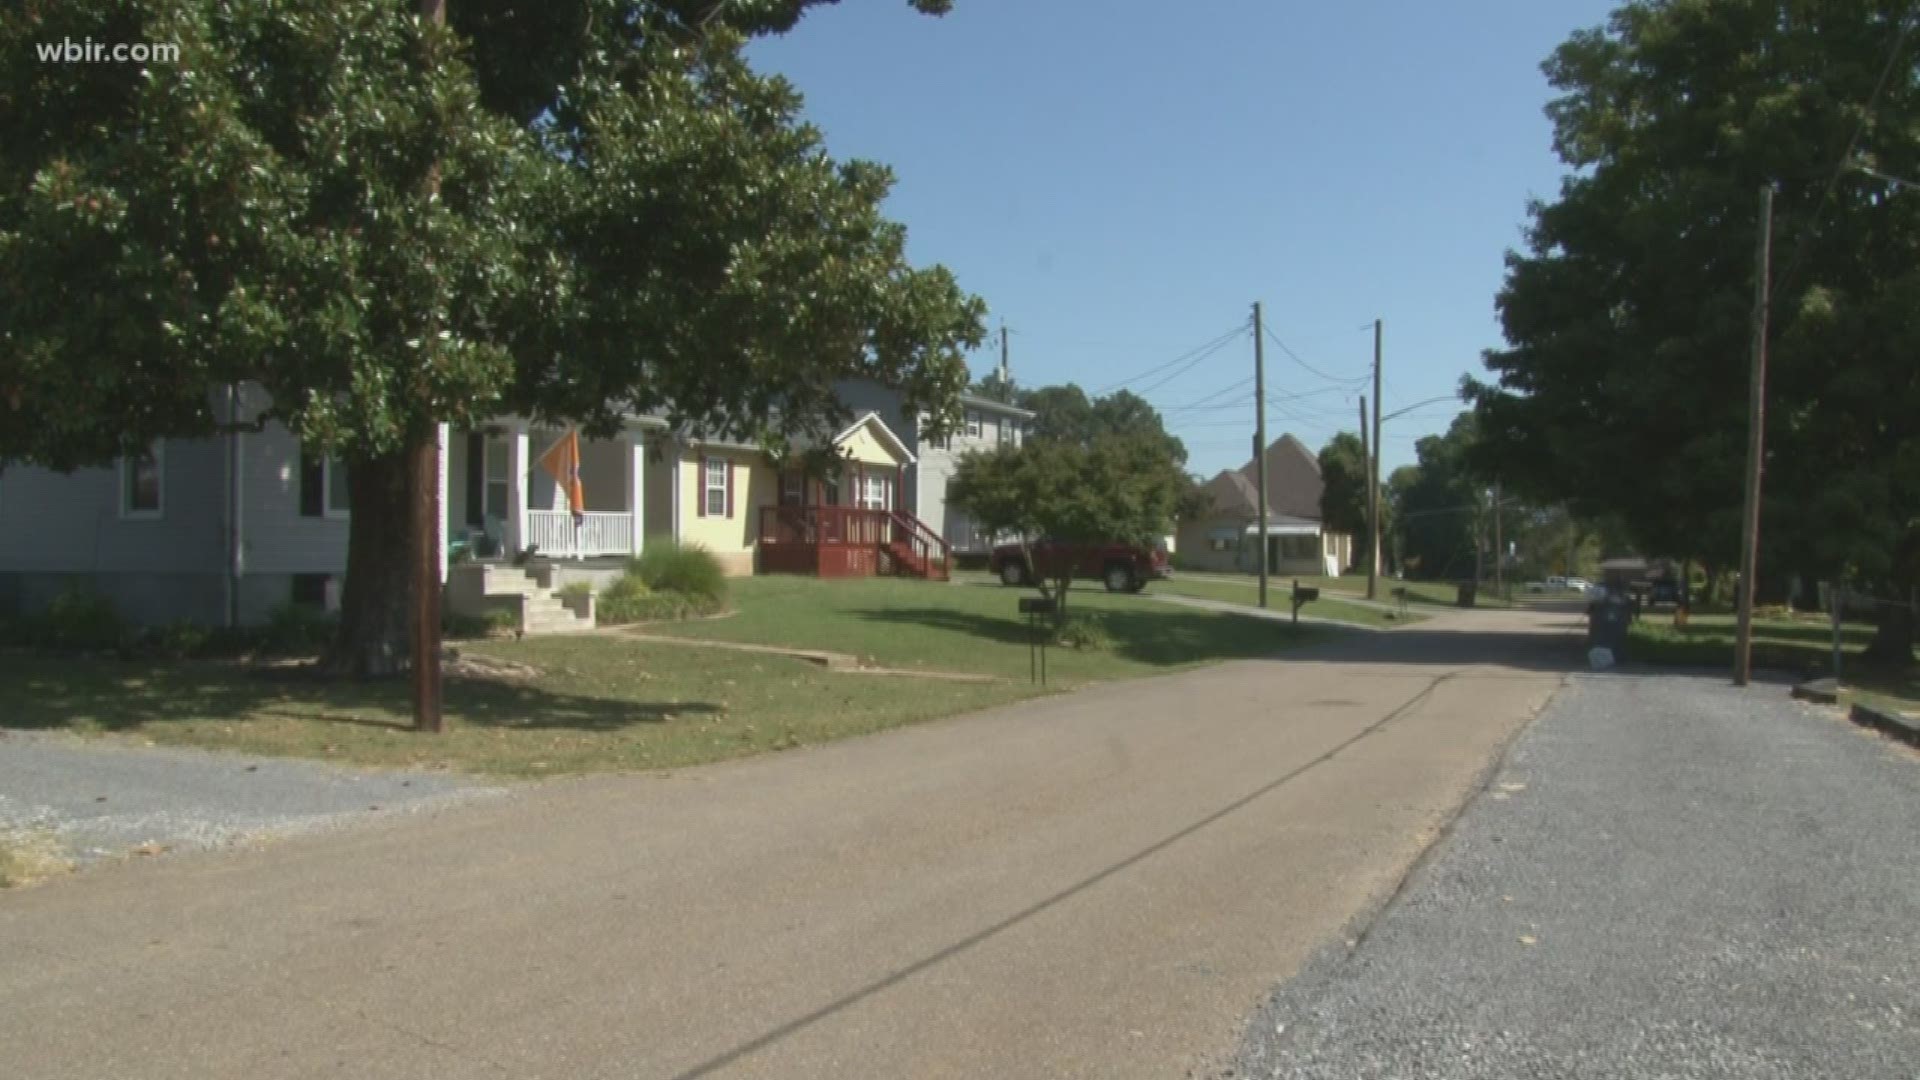 Neighbors in Fountain City are still in disbelief as police investigate a homicide on their block. Knoxville police said a 5-year-old is dead after a shooting on Balsam Drive Saturday night, and police said it was not a random attack.